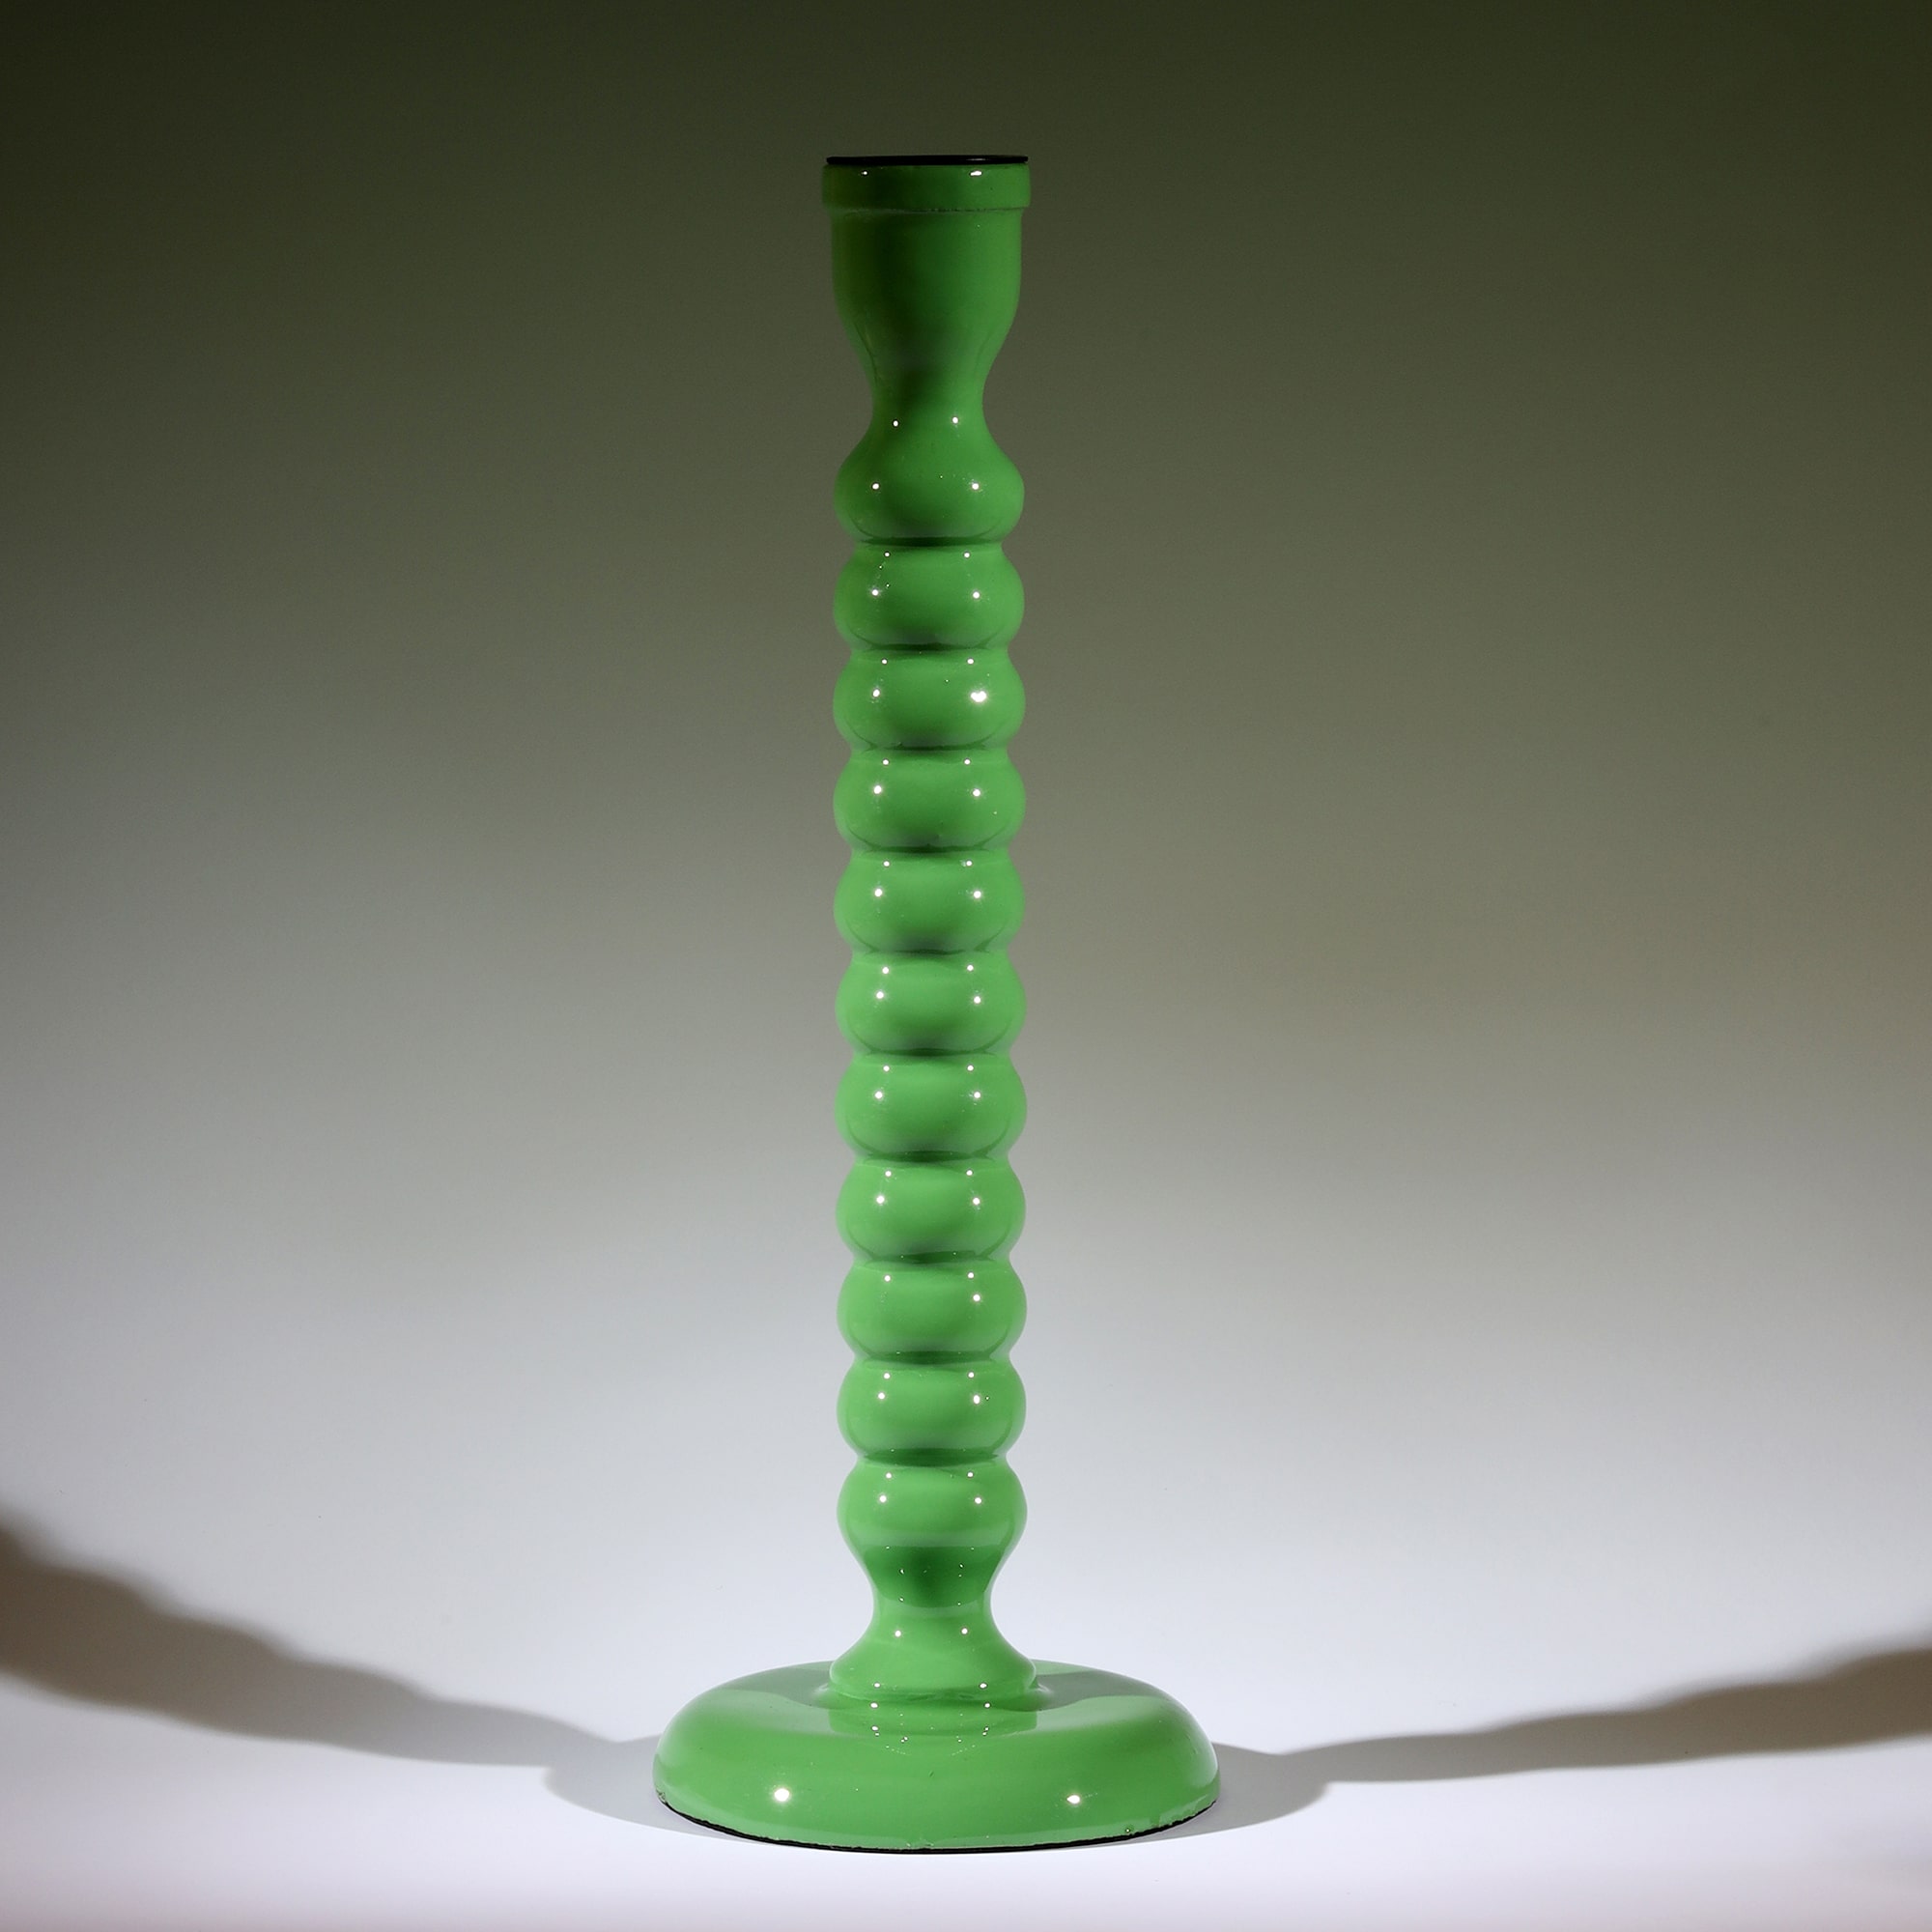 Bud Green Polished Lacquer Candle holder,it is twisted all the way down like a corkscrew tapered at the bottom.